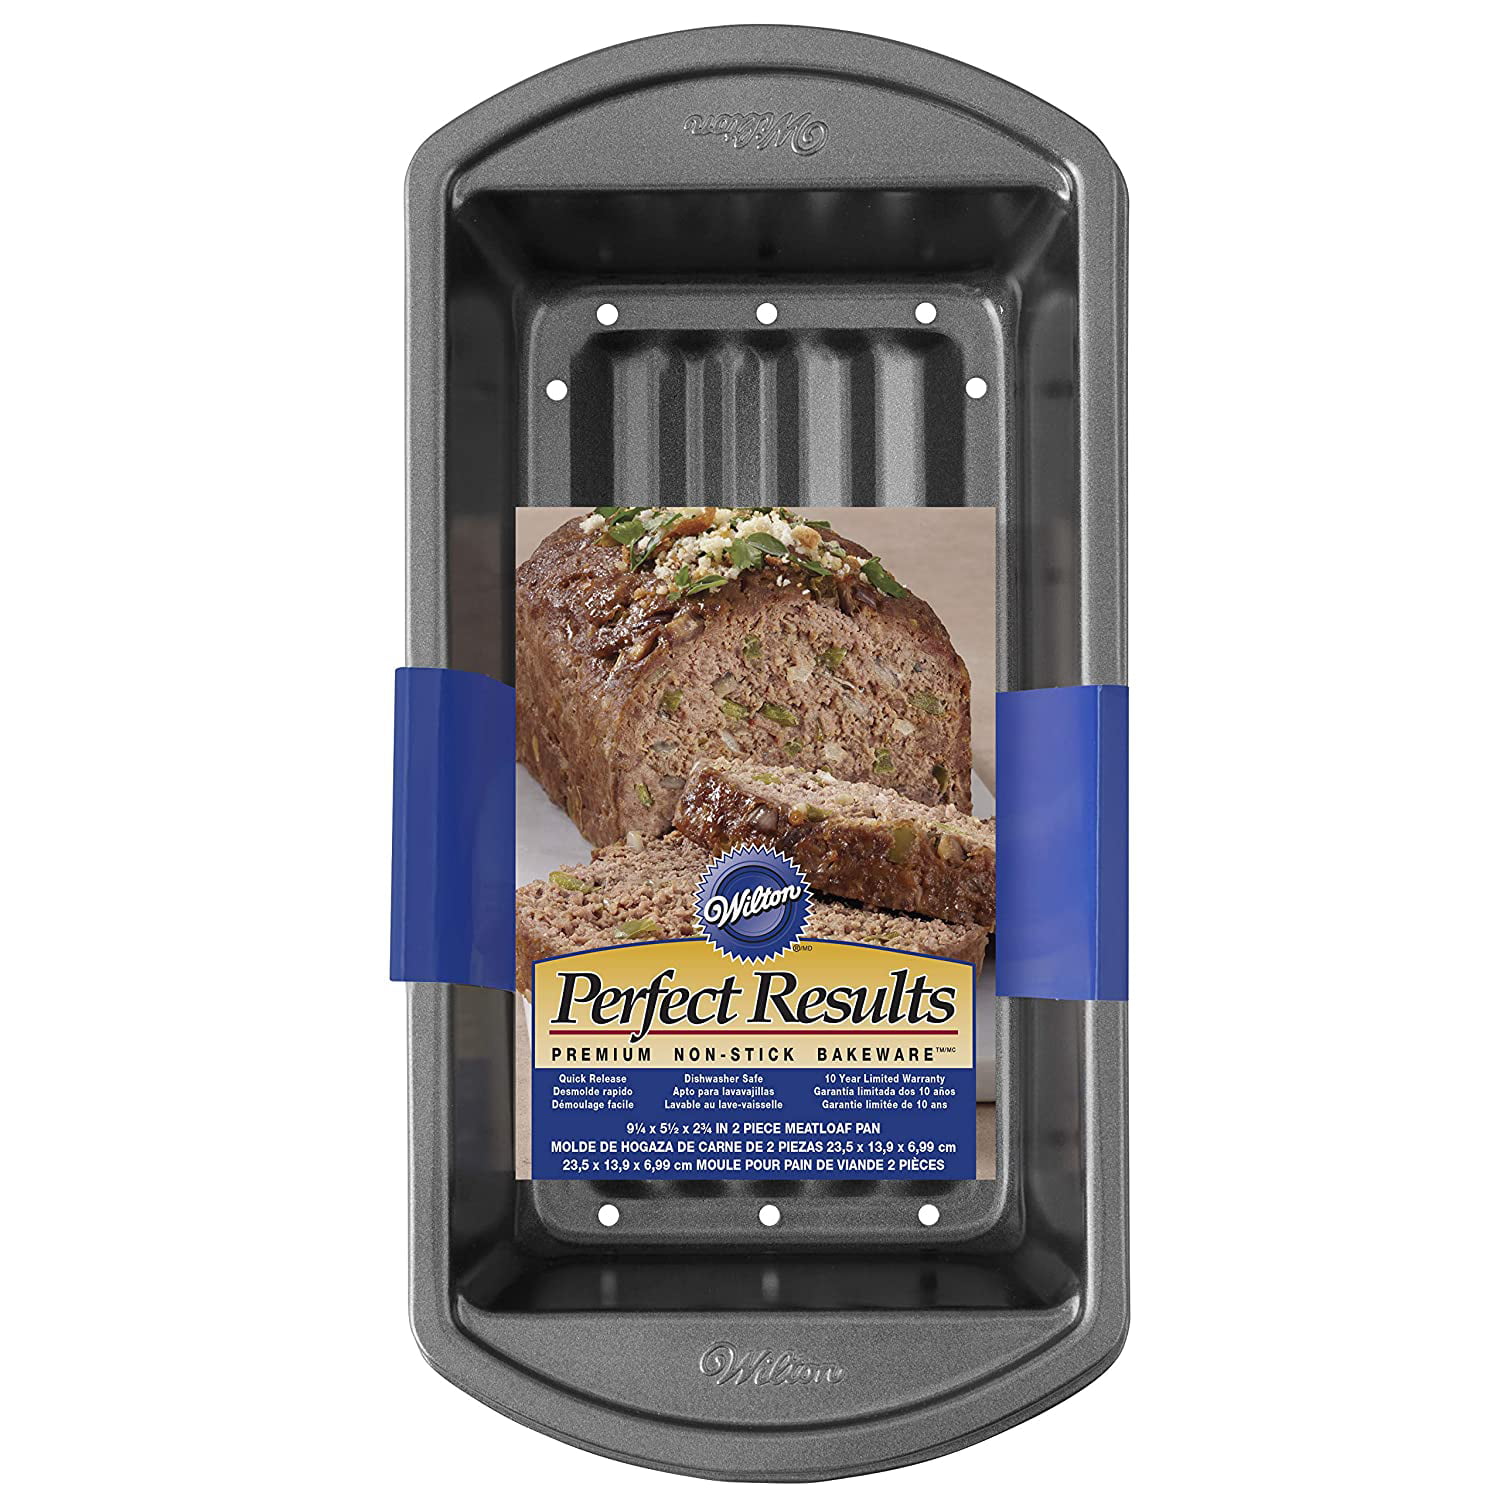 2-Piece Set Reduce the Fat and Kick Up the Flavor Wilton Perfect Results Premium Non-Stick Bakeware Meatloaf Pan Set 9.25 x 5.25 x 2.75 inch